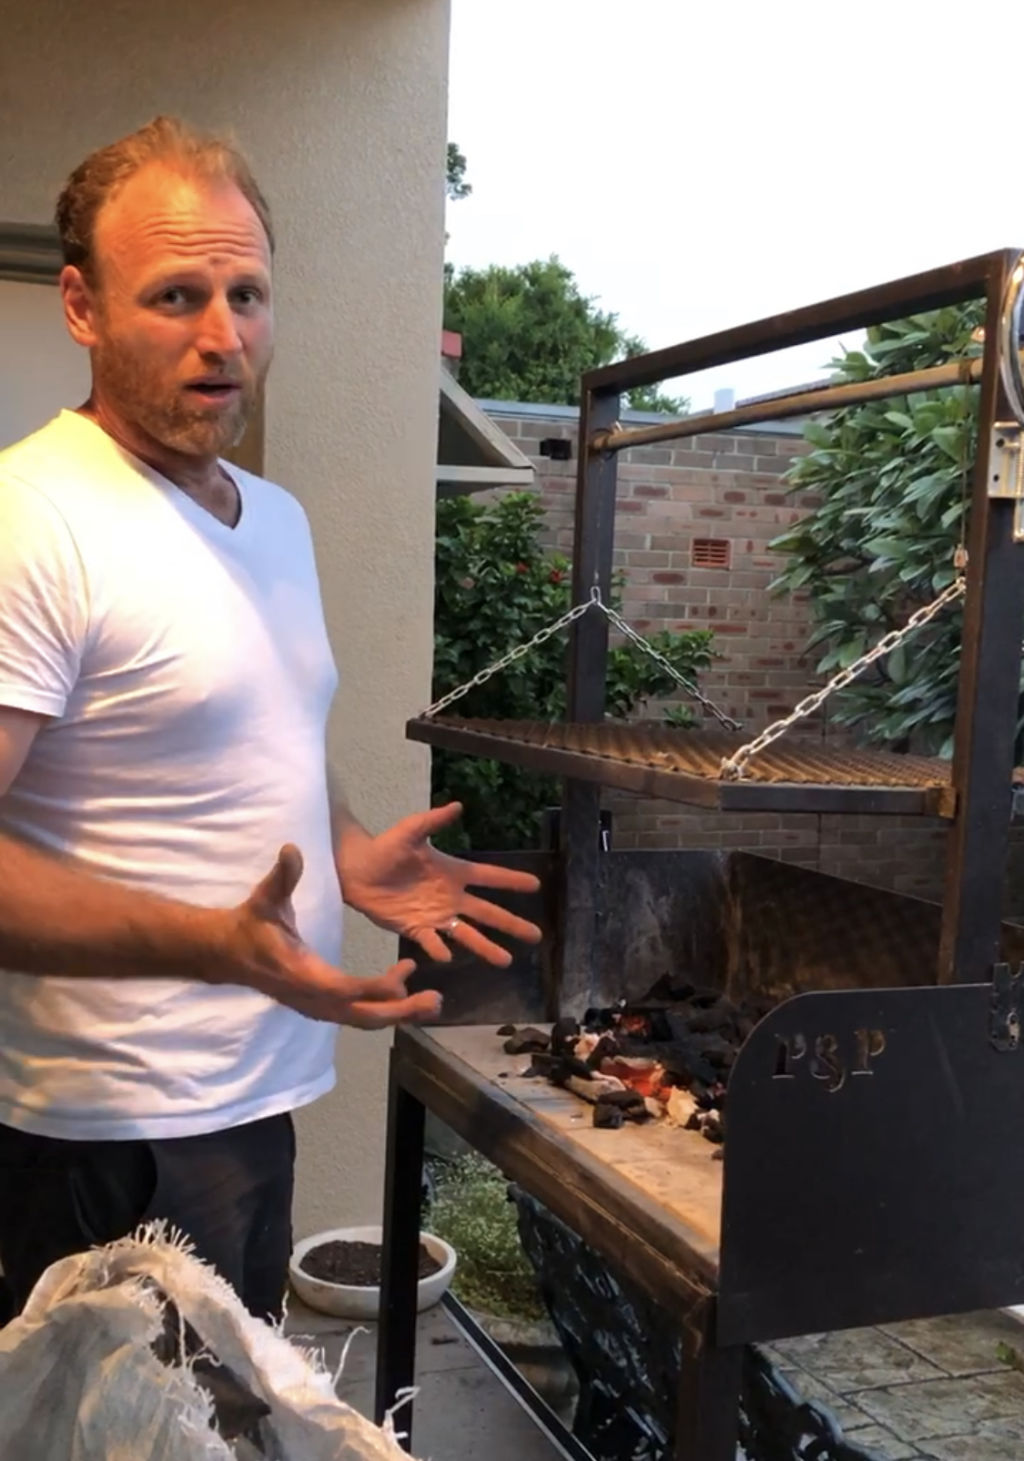 Charlie and his wife Alex decided to call their barbecue business Pig & Pilgrim, and it is currently booming.  Photo: Supplied